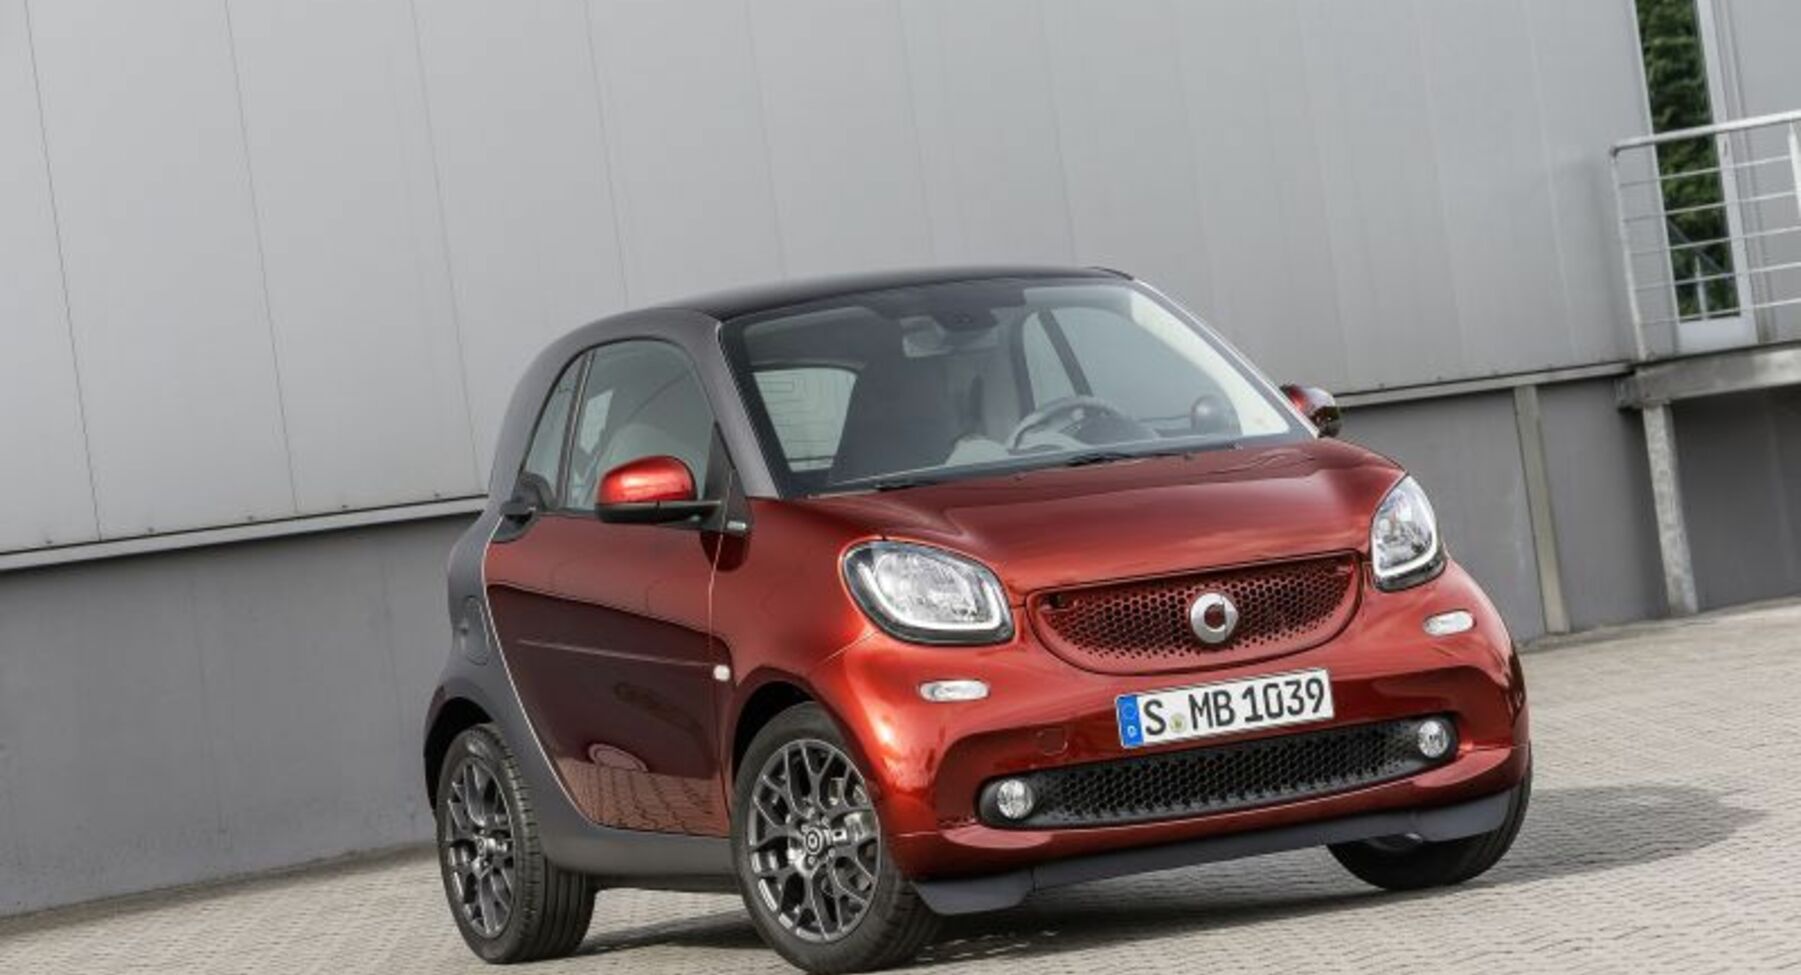 Smart Fortwo III coupe (C453) 17.6 kWh (75 Hp) electric drive 2014, 2015, 2016, 2017 